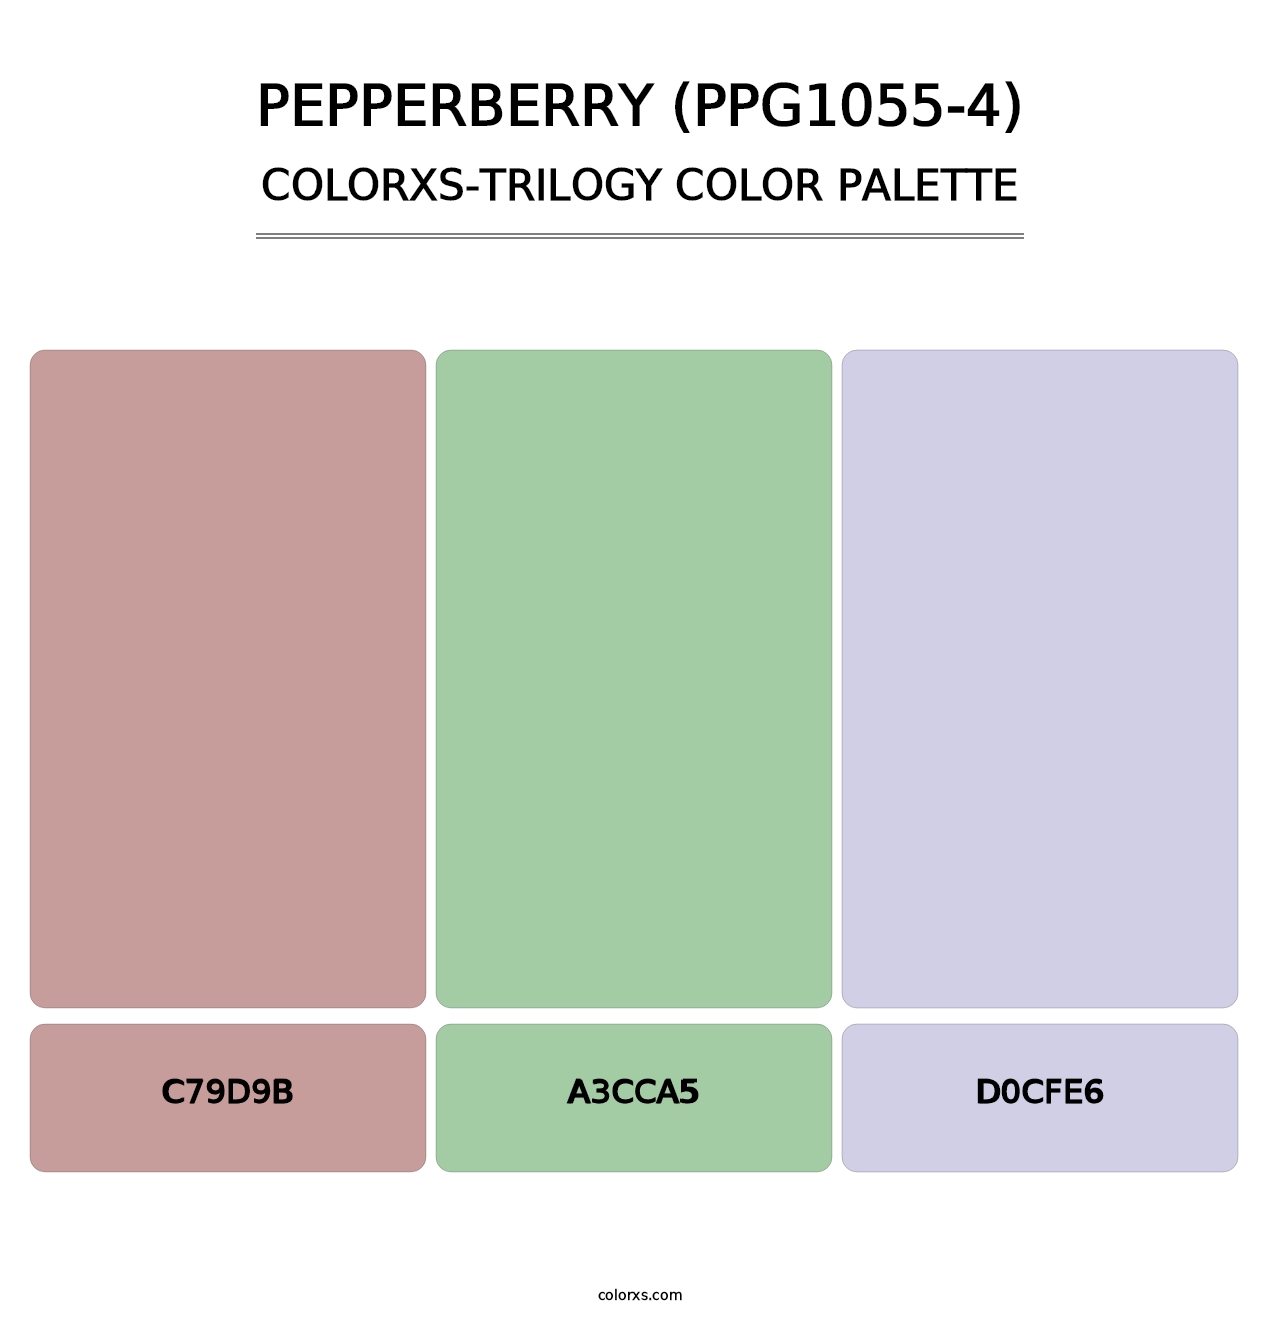 Pepperberry (PPG1055-4) - Colorxs Trilogy Palette